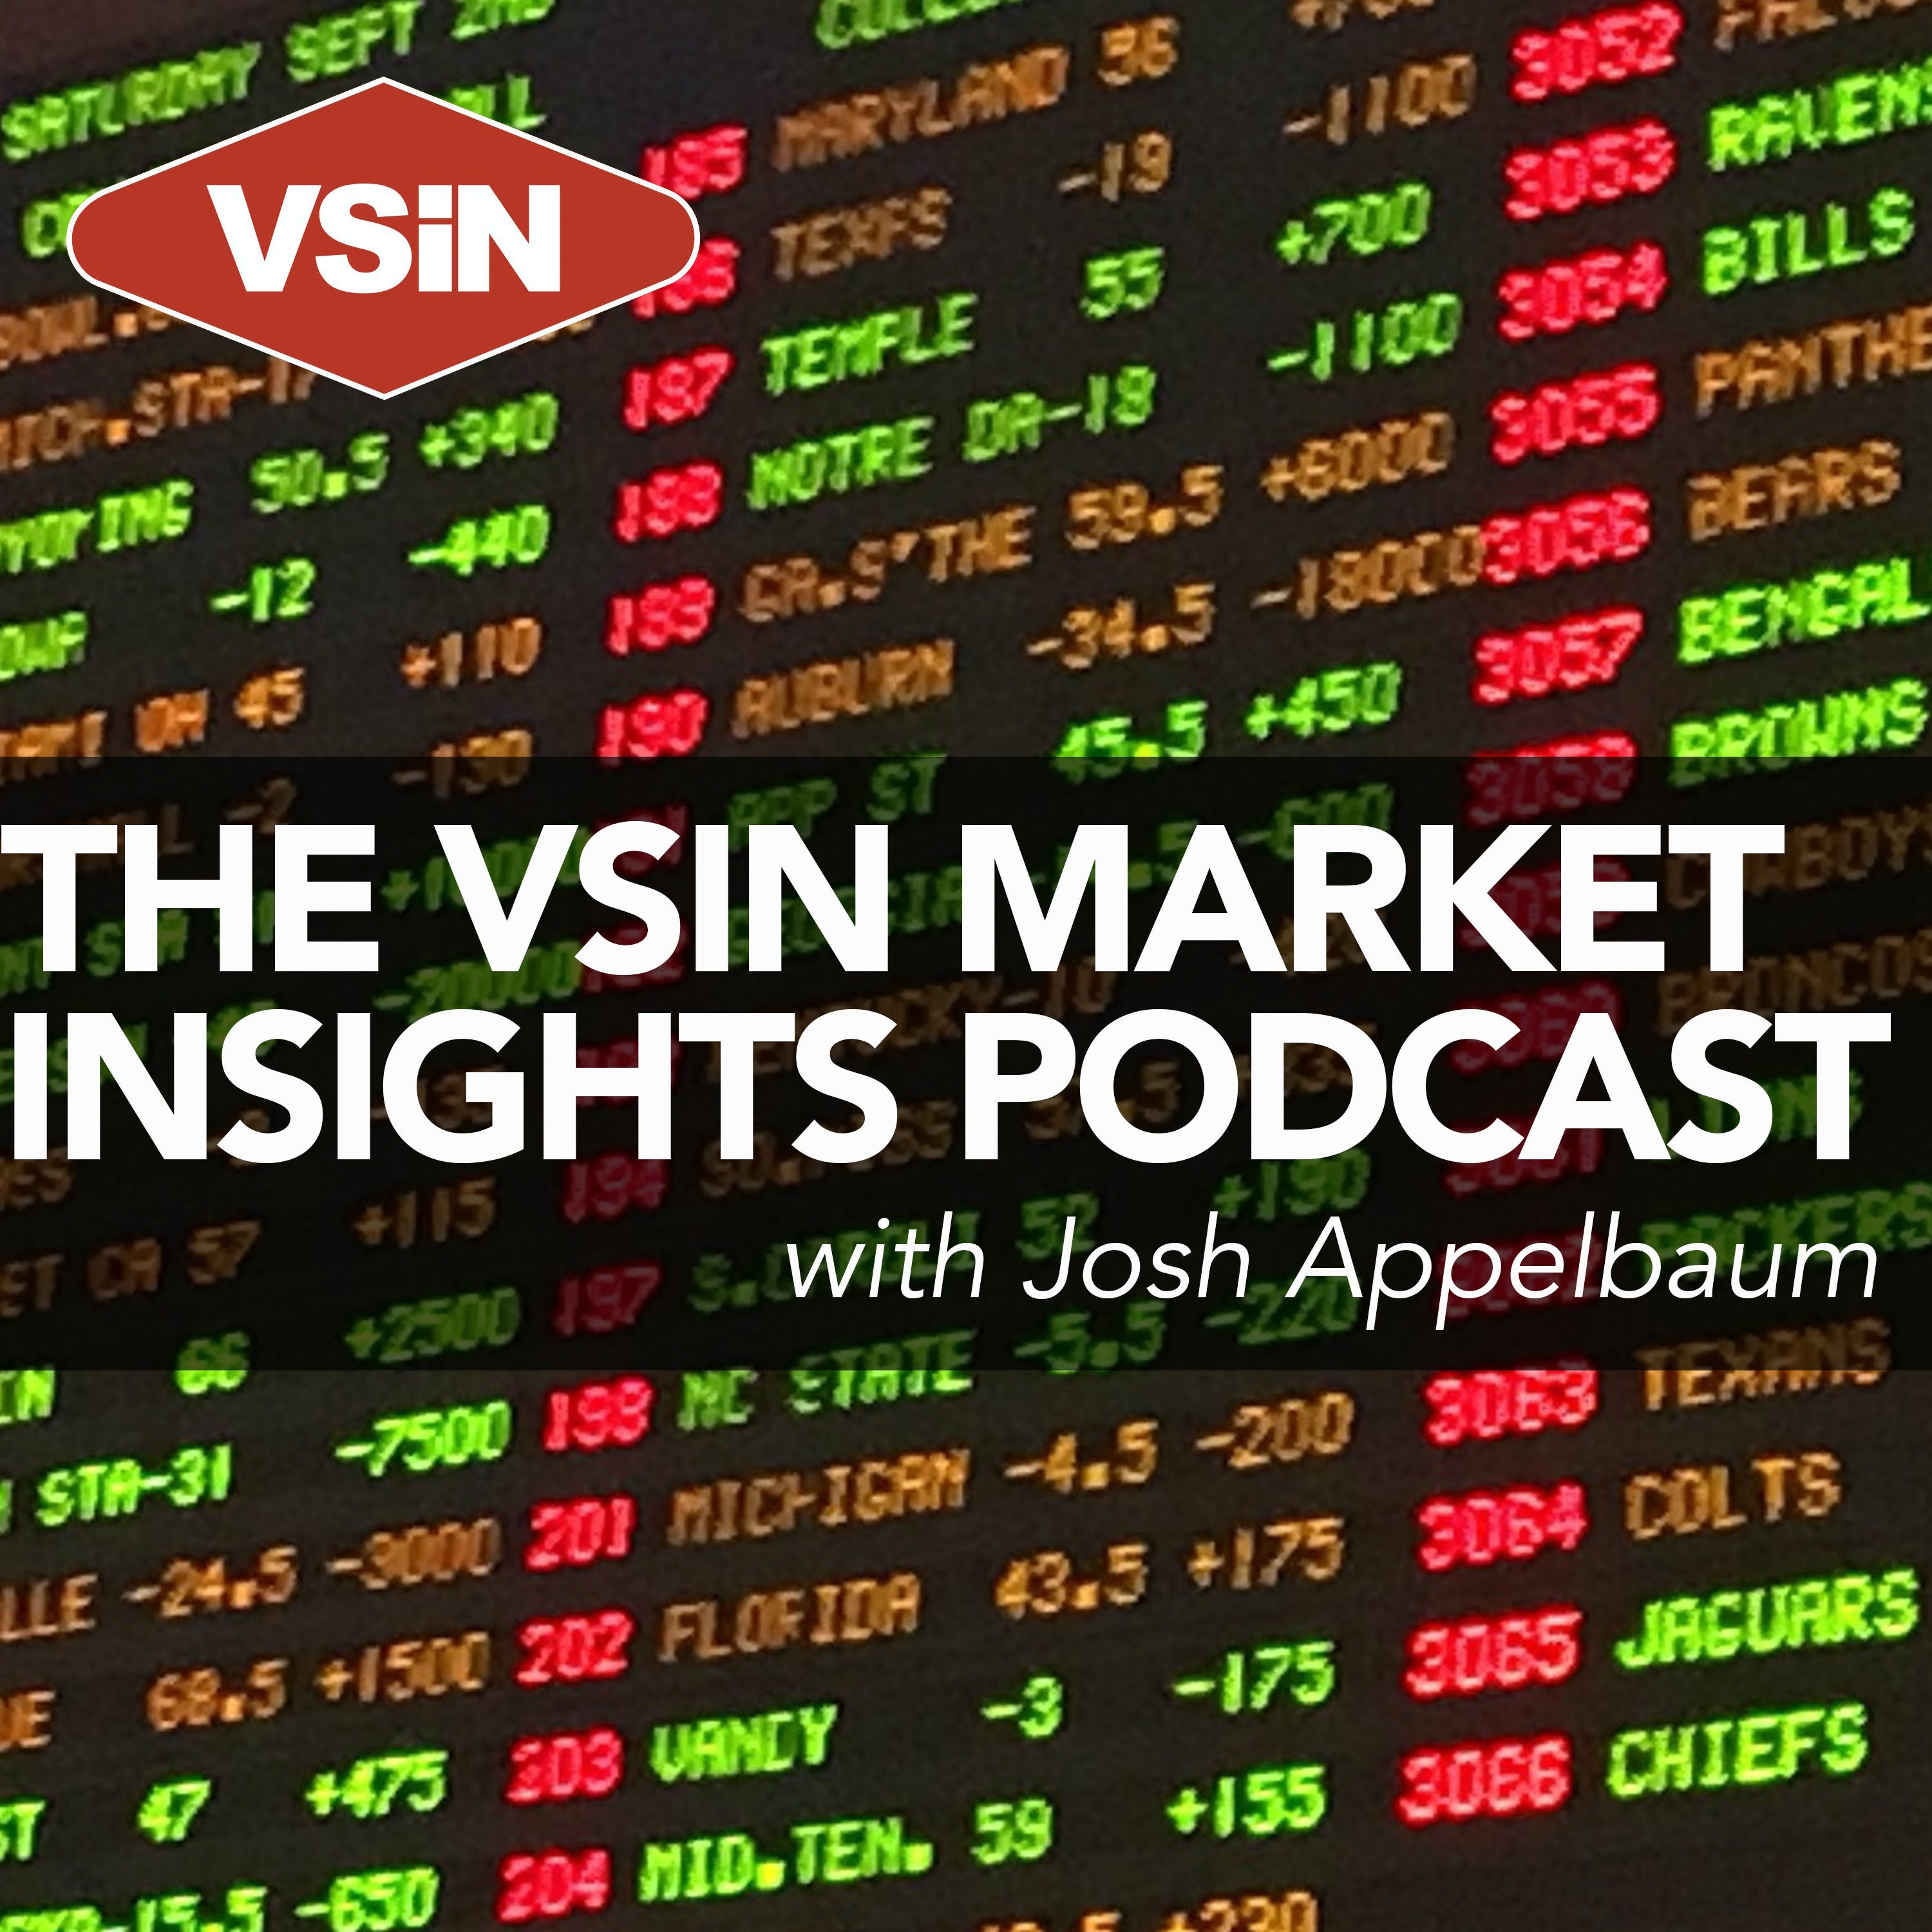 Trailer for The VSiN Market Insights Podcast with Josh Appelbaum